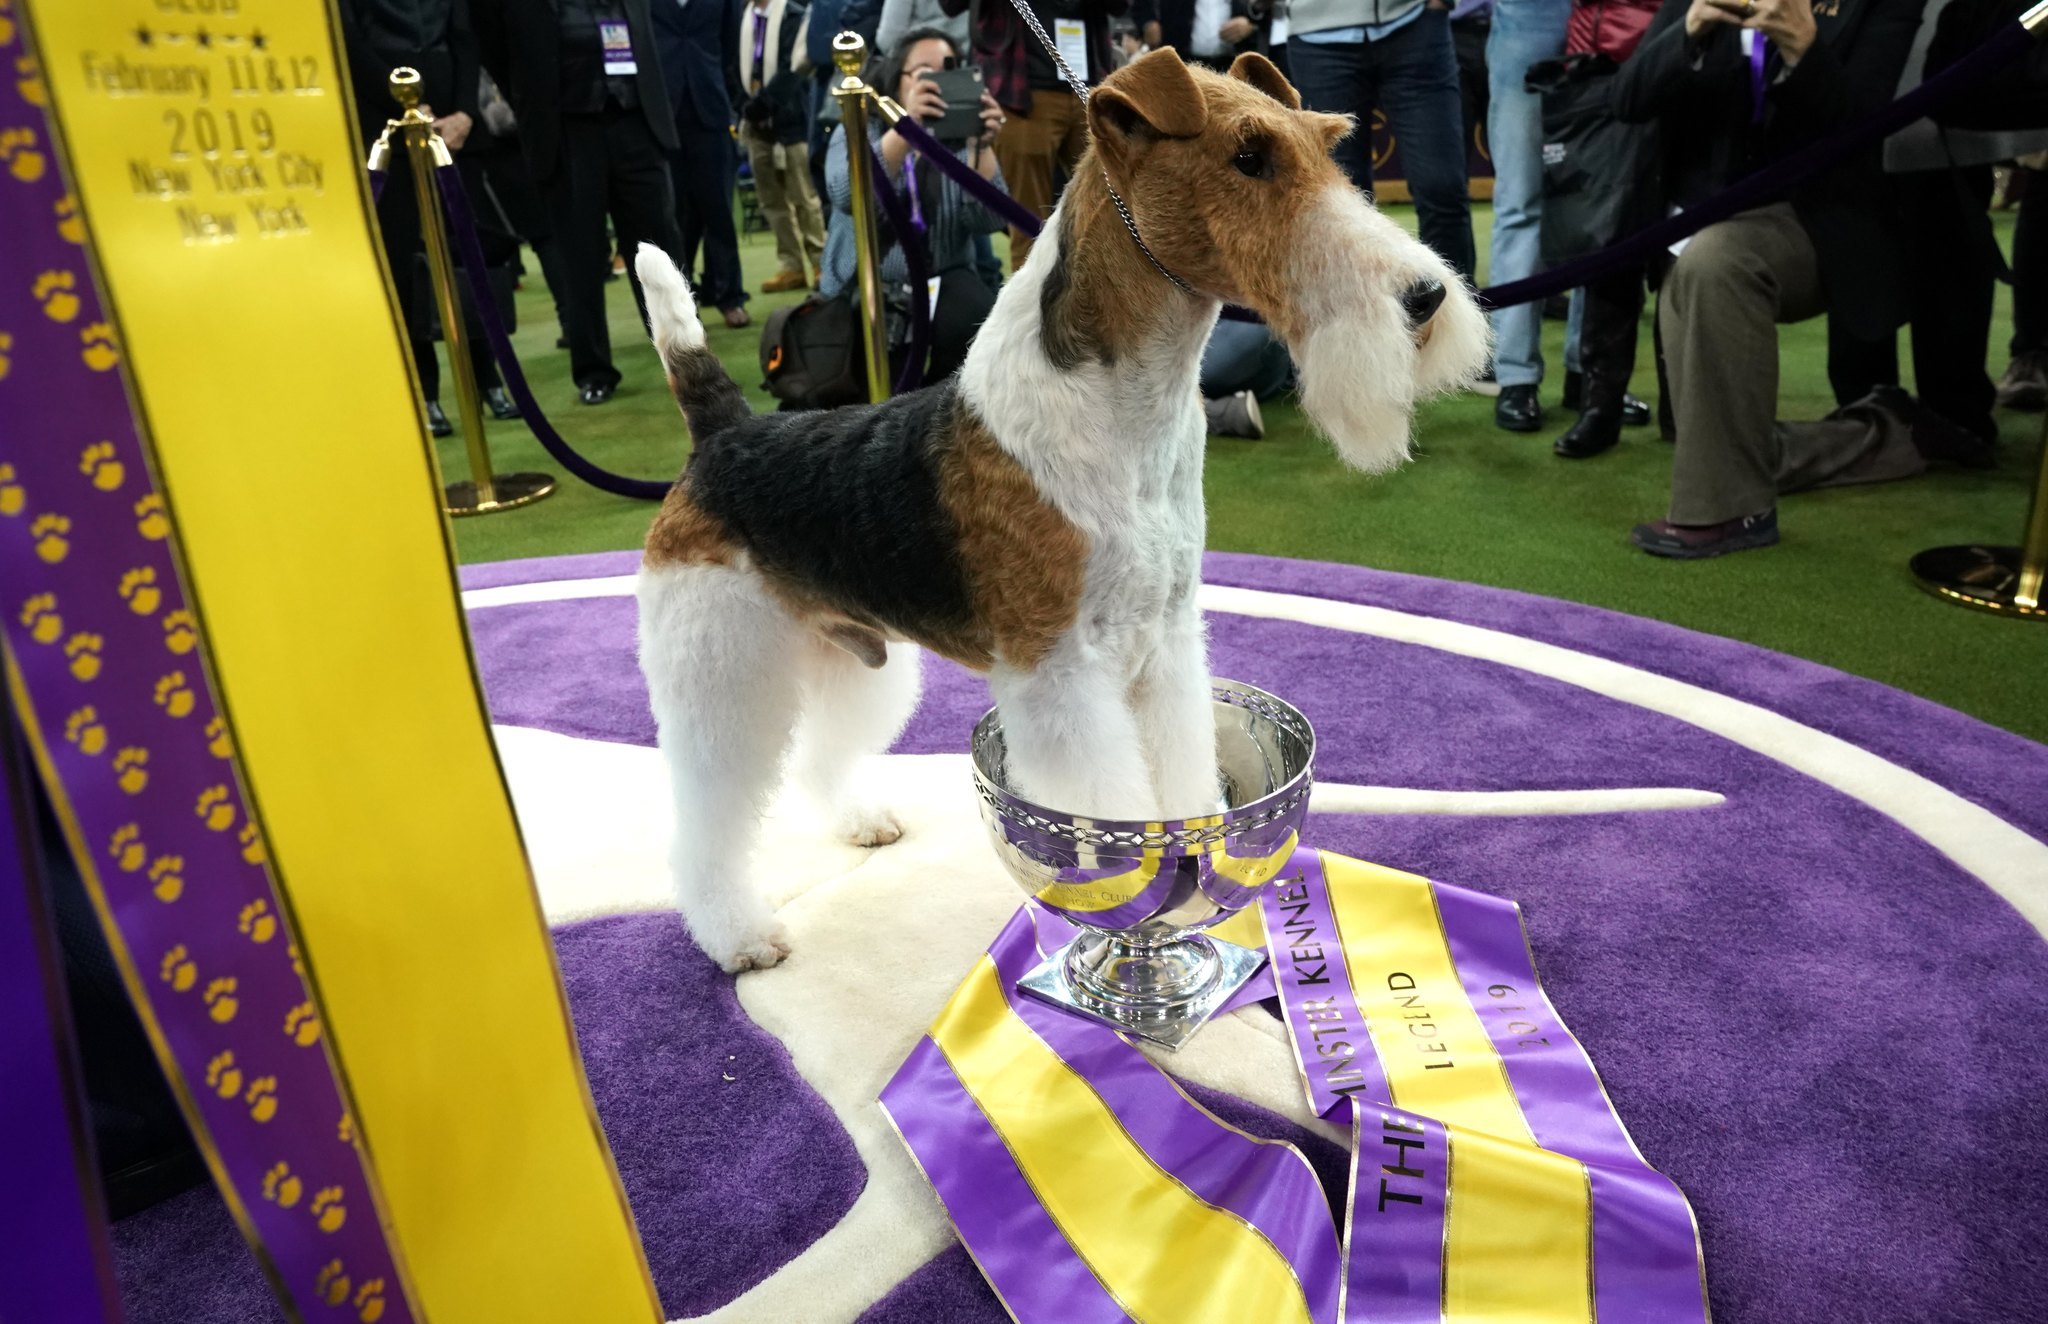 Westminster Kennel Club Dog Show 2019: Meet the best of the good dogs - Orlando Sentinel